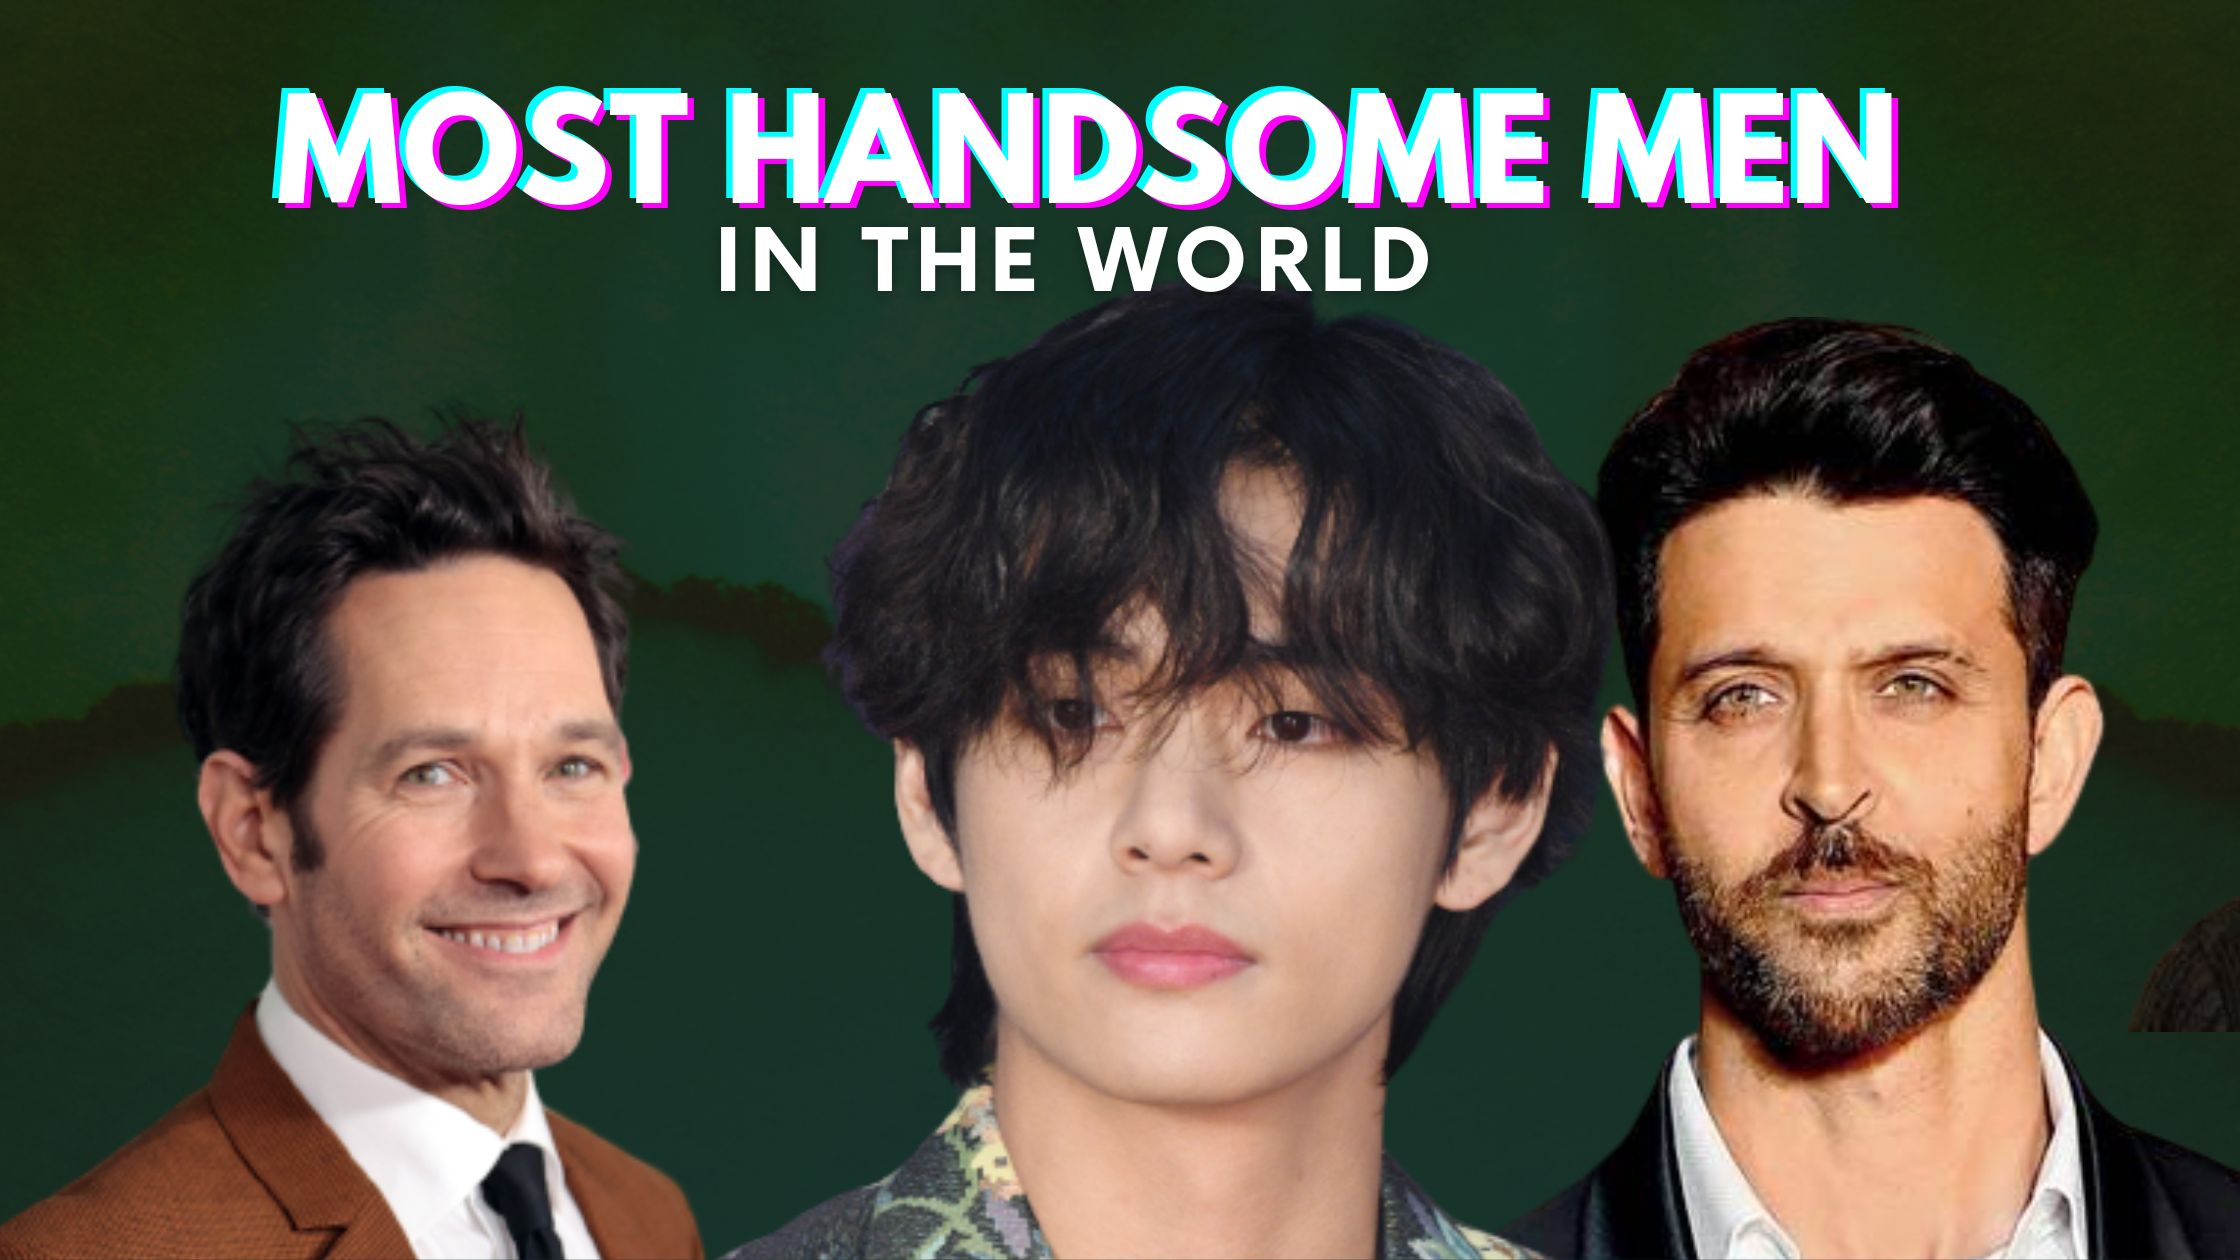 Top 10 Most Handsome Men In The World 2022